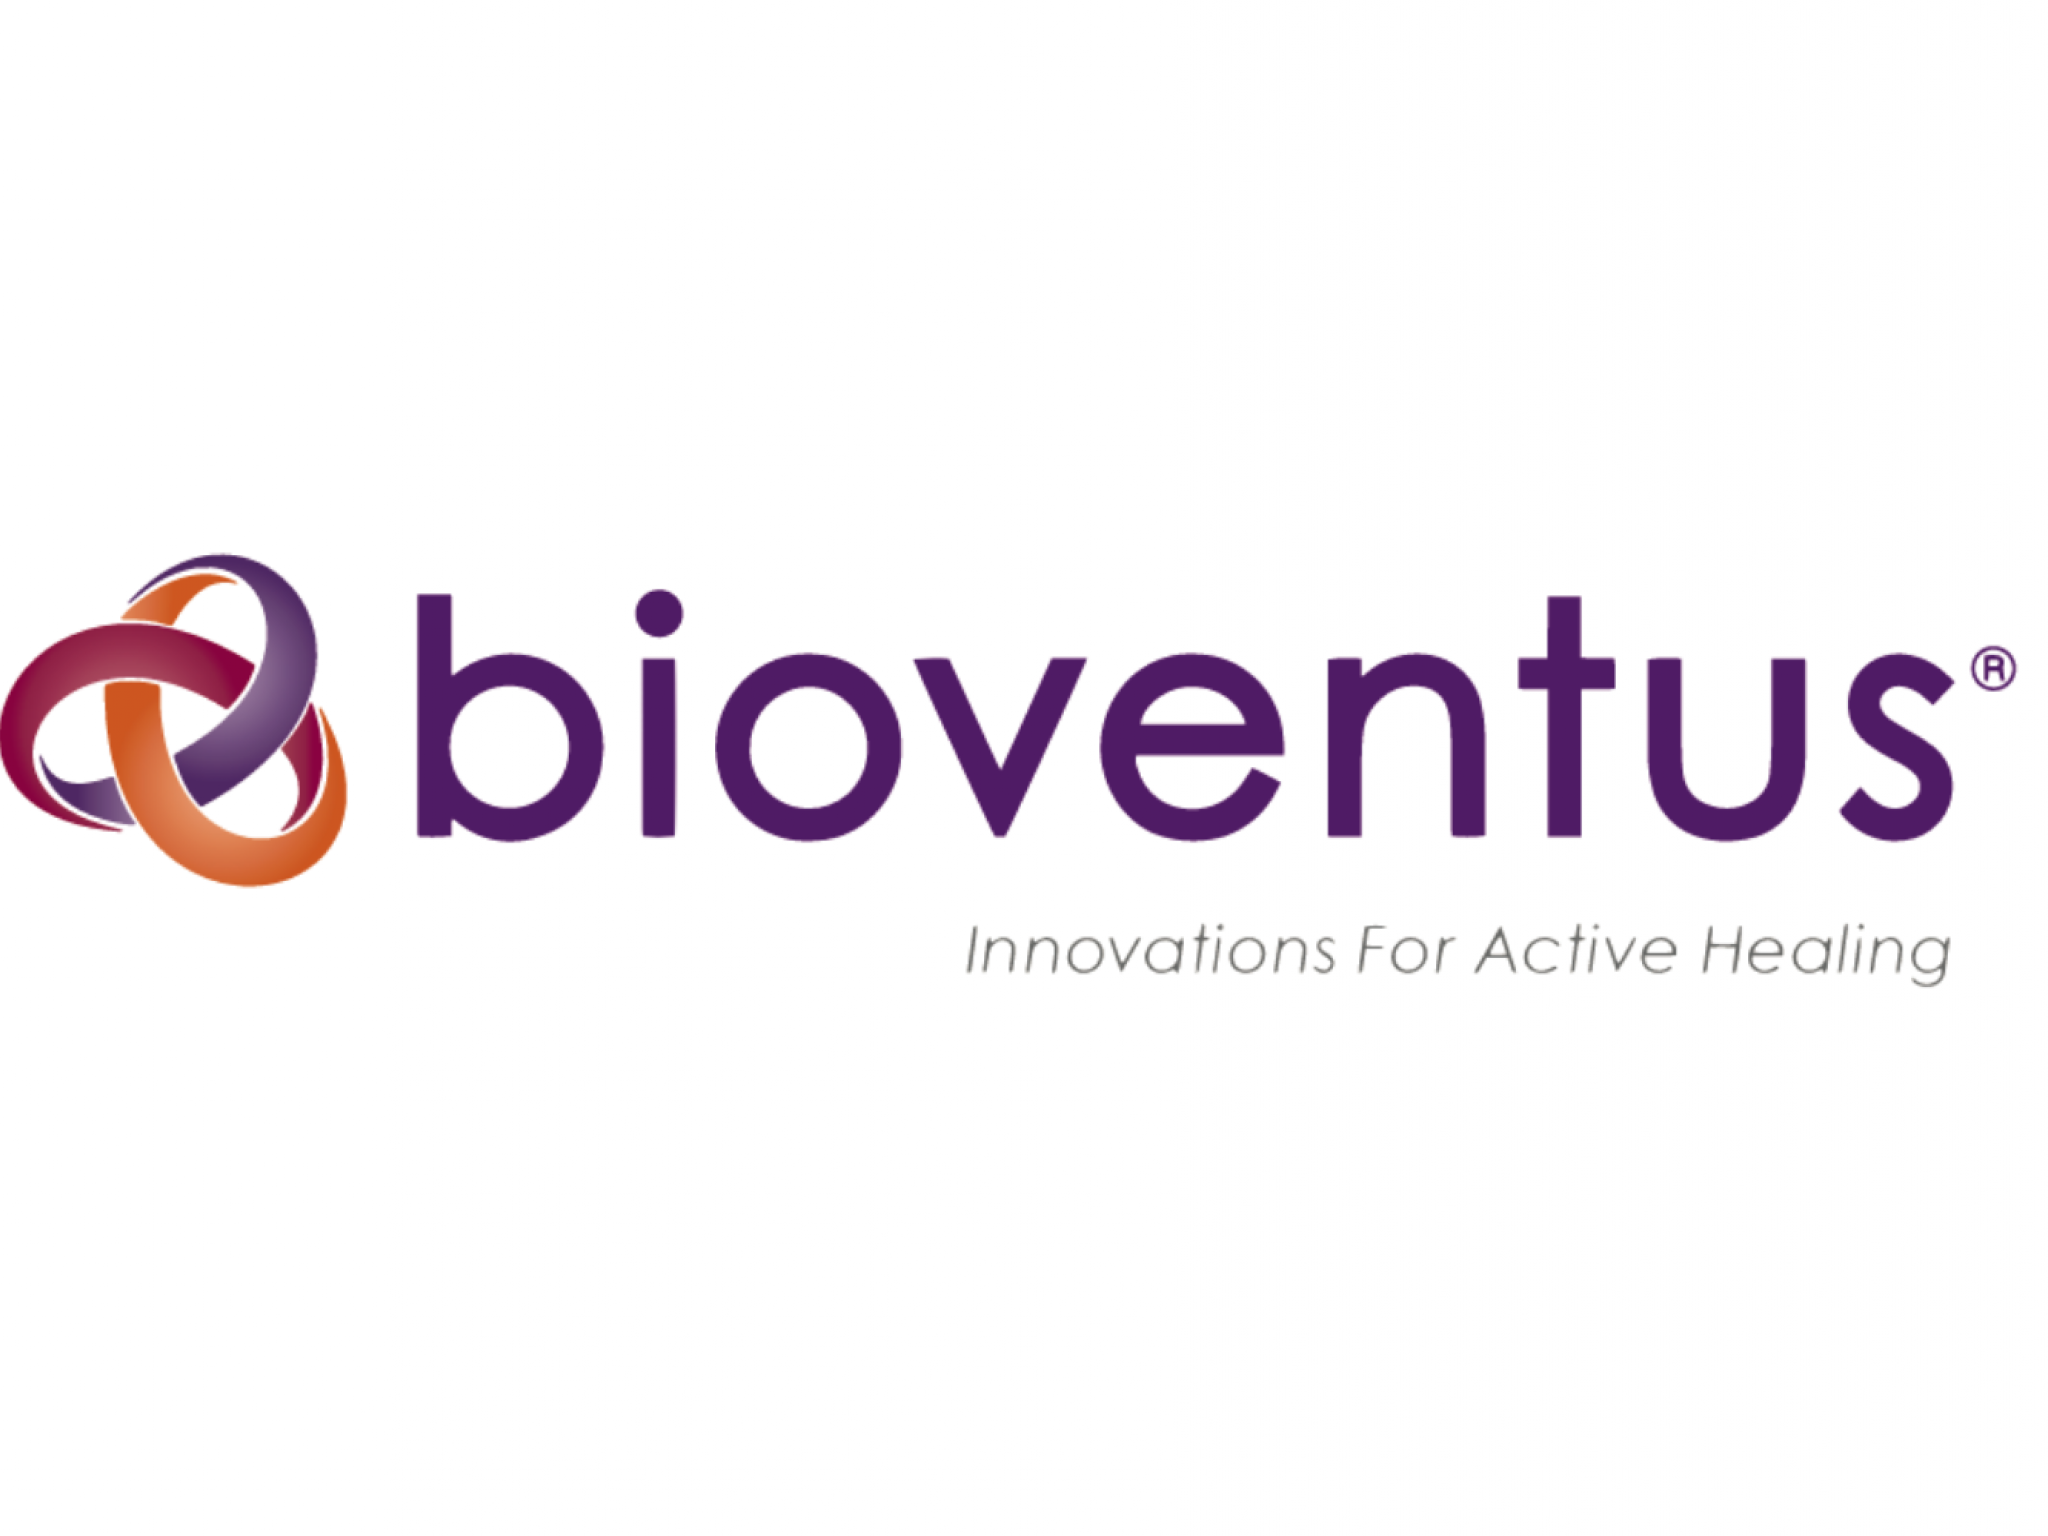  medtech-bioventus-stabilization-sparks-analyst-confidence-earns-upgrade-and-price-target-boost 